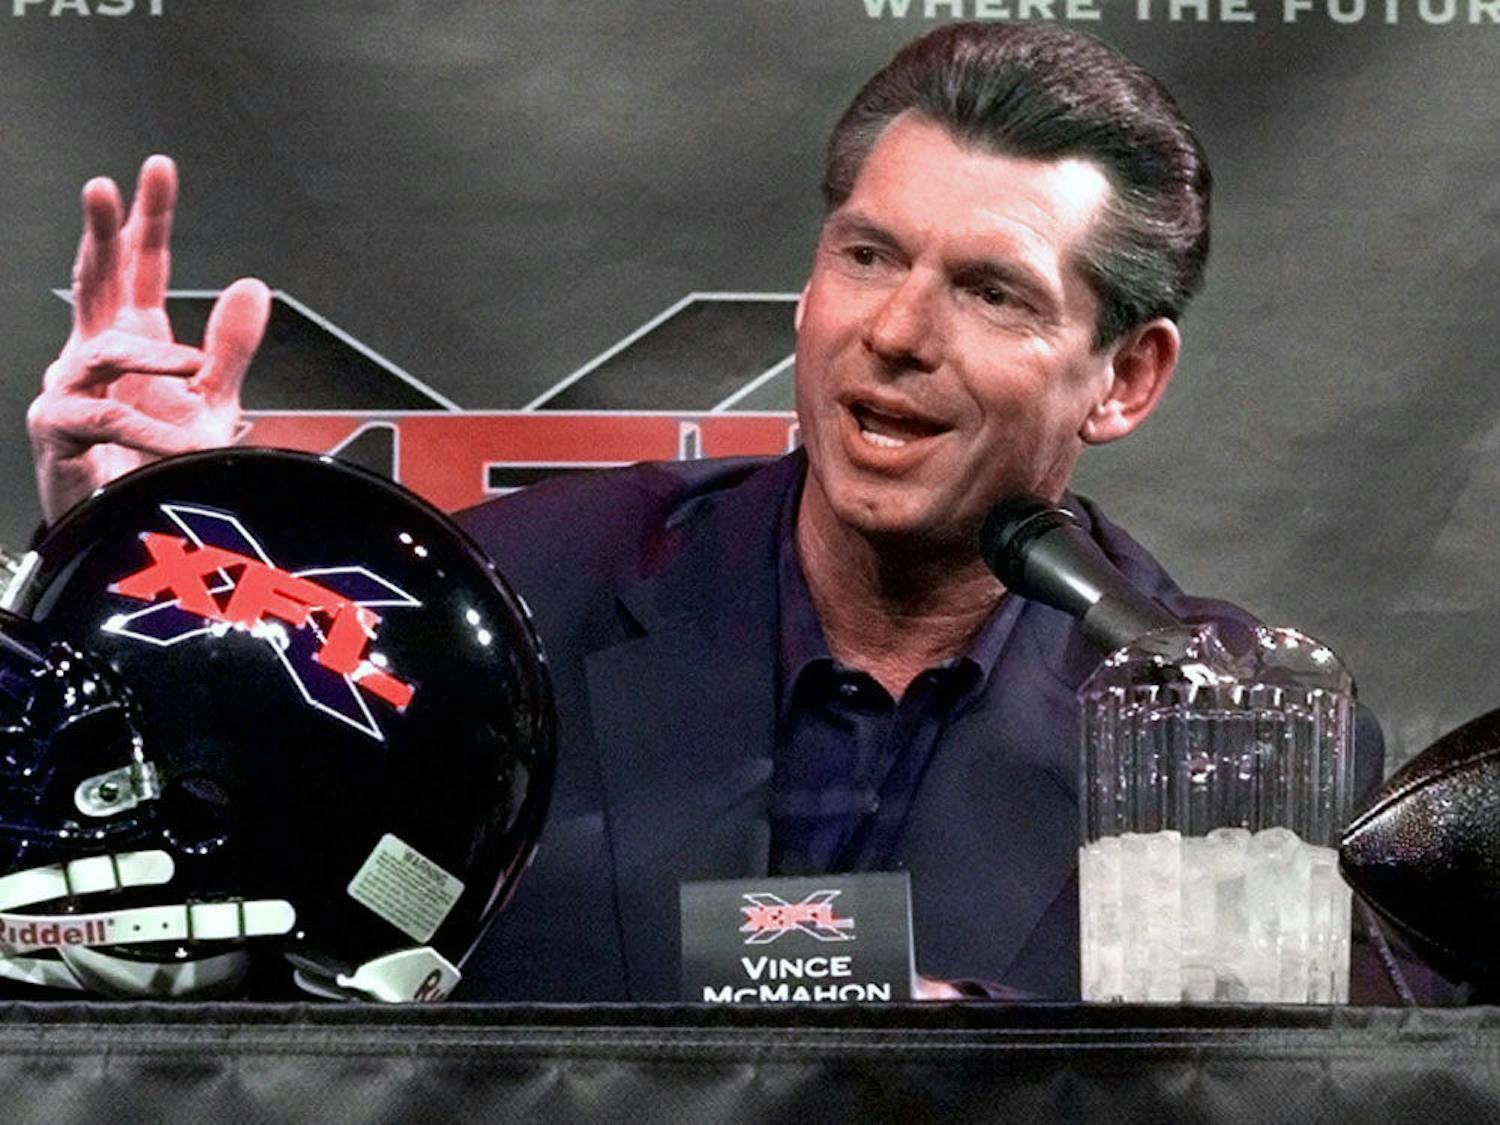 Vince McMahon announced last week his intention of resurrecting the XFL, a football league he founded in 2001. The league folded after one season.&nbsp;